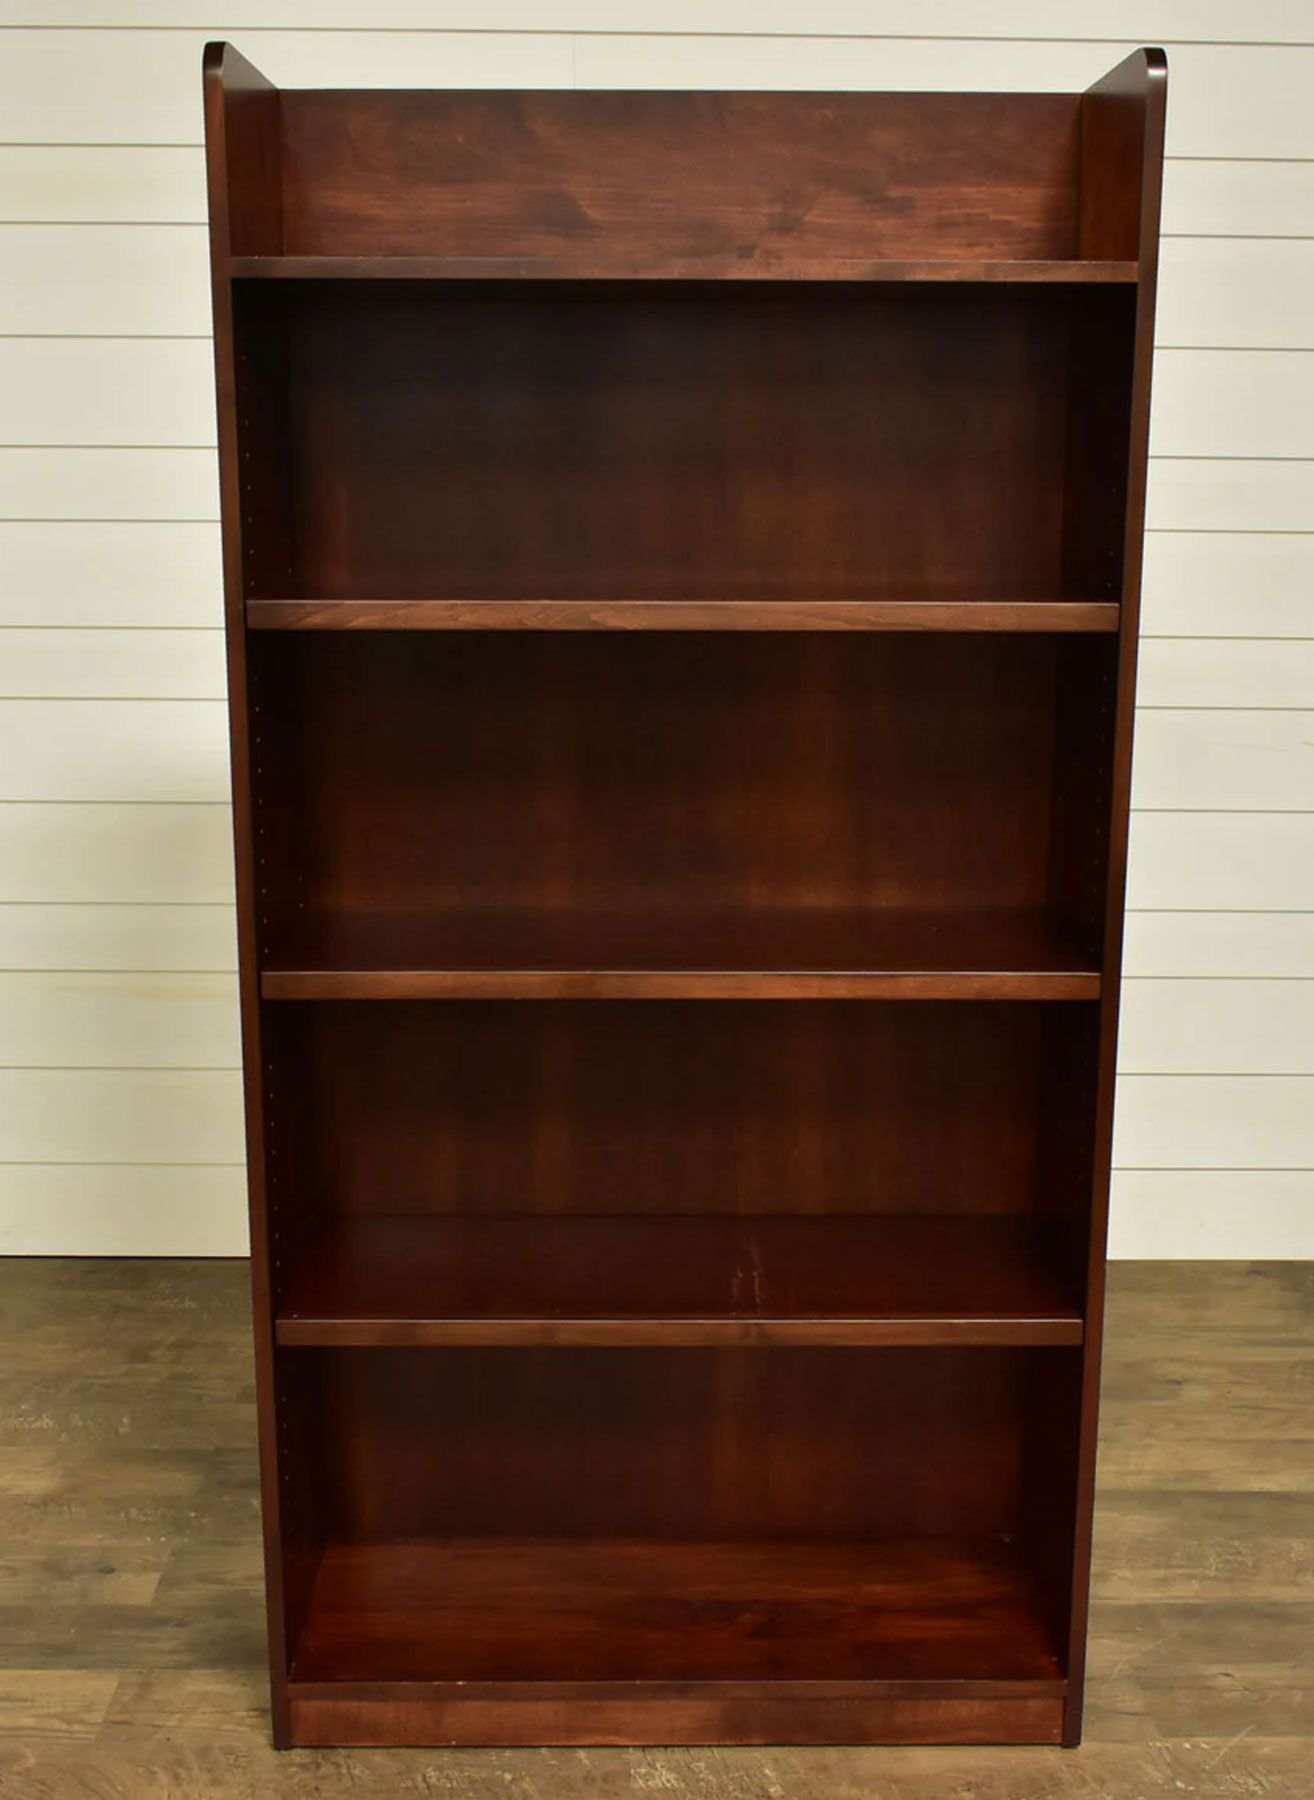 Rivertowne 36 x 72 Bookcase in Brown Maple